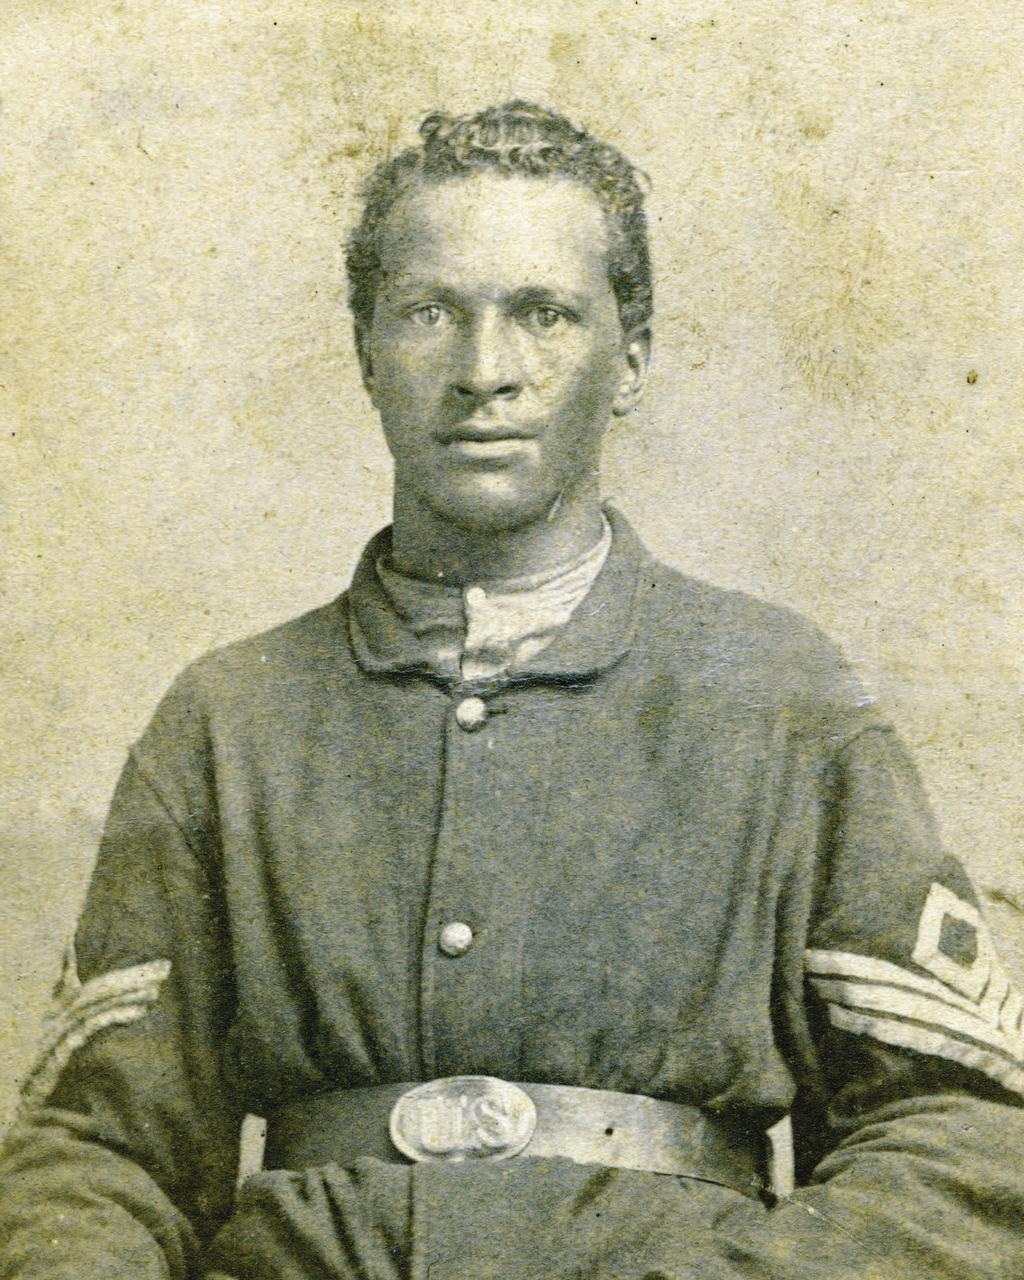 ergeant William Messley First ergeant William A. Messley (also known as Measley) of Company C, 2nd United tates Colored Troops, posed for this portrait shortly after his enlistment in late 3.